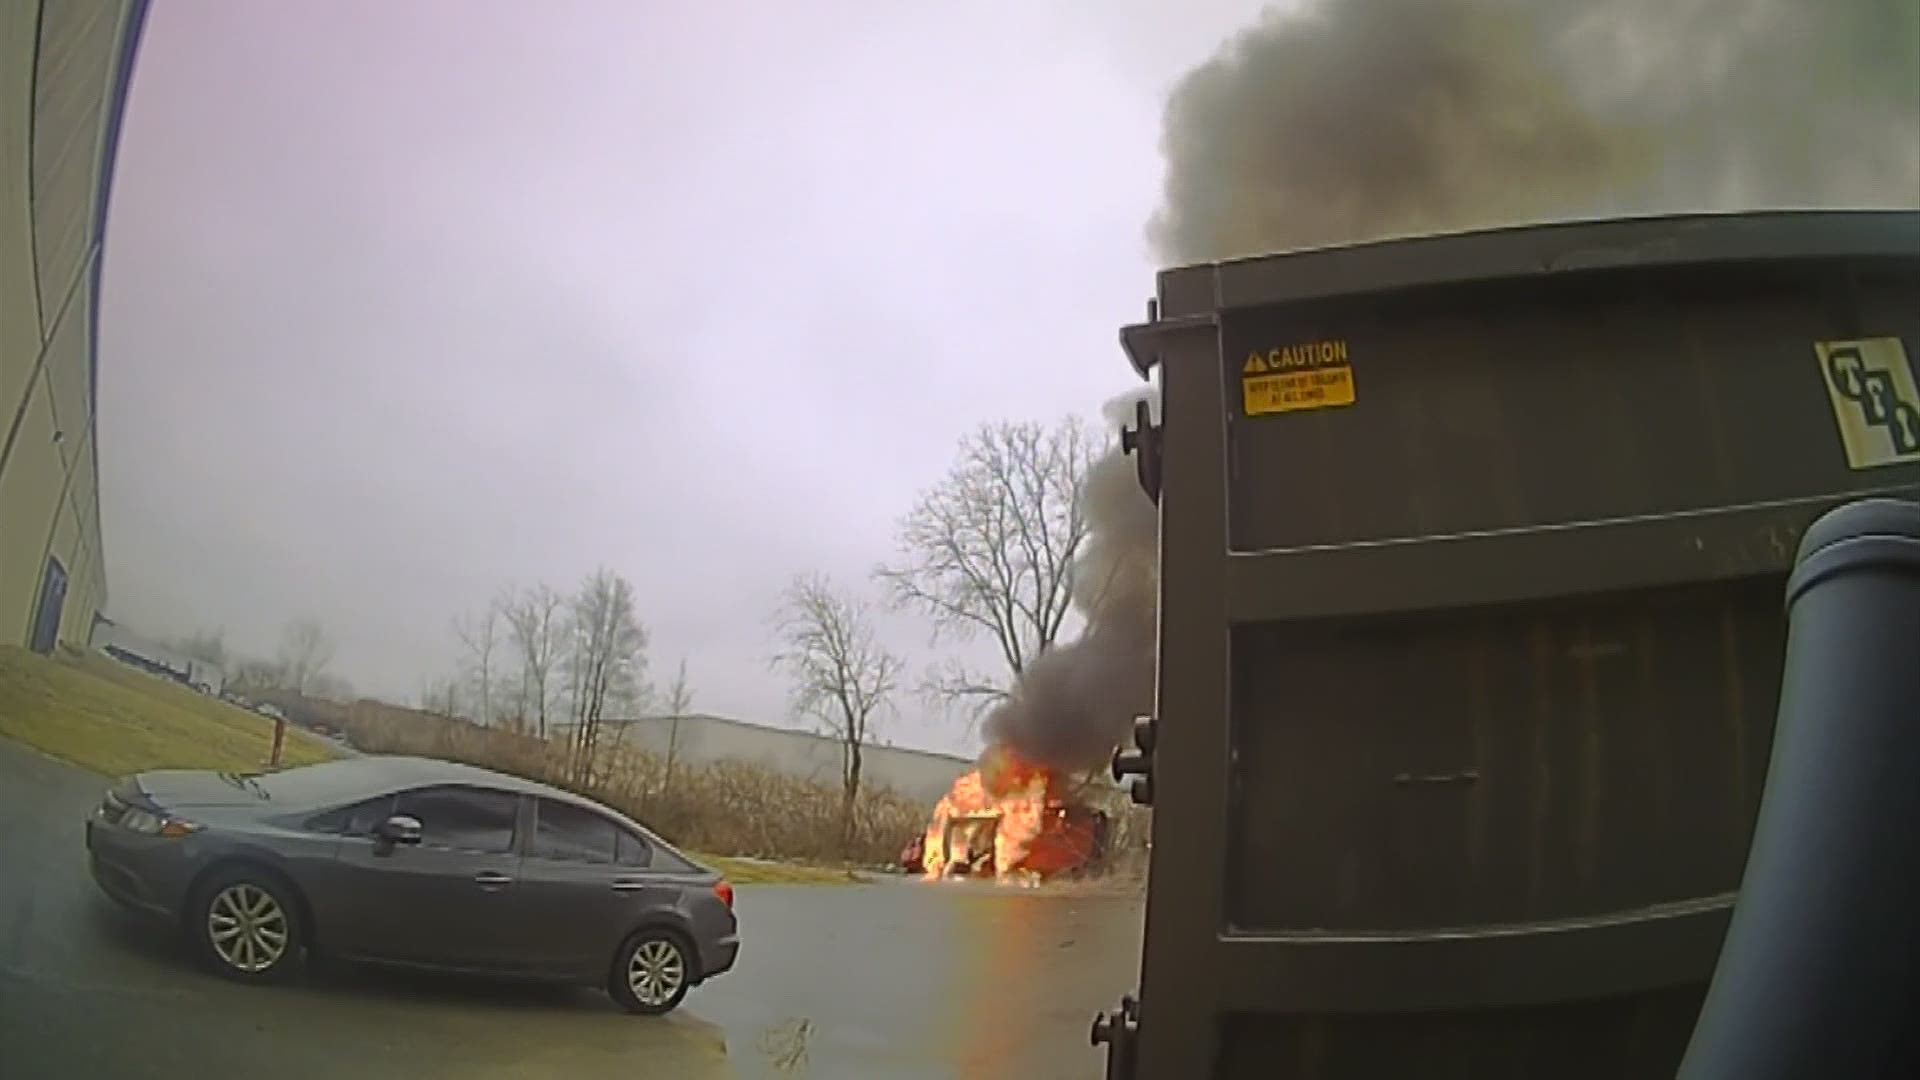 Police body cameras and 911 calls shed more light on the fiery crash.